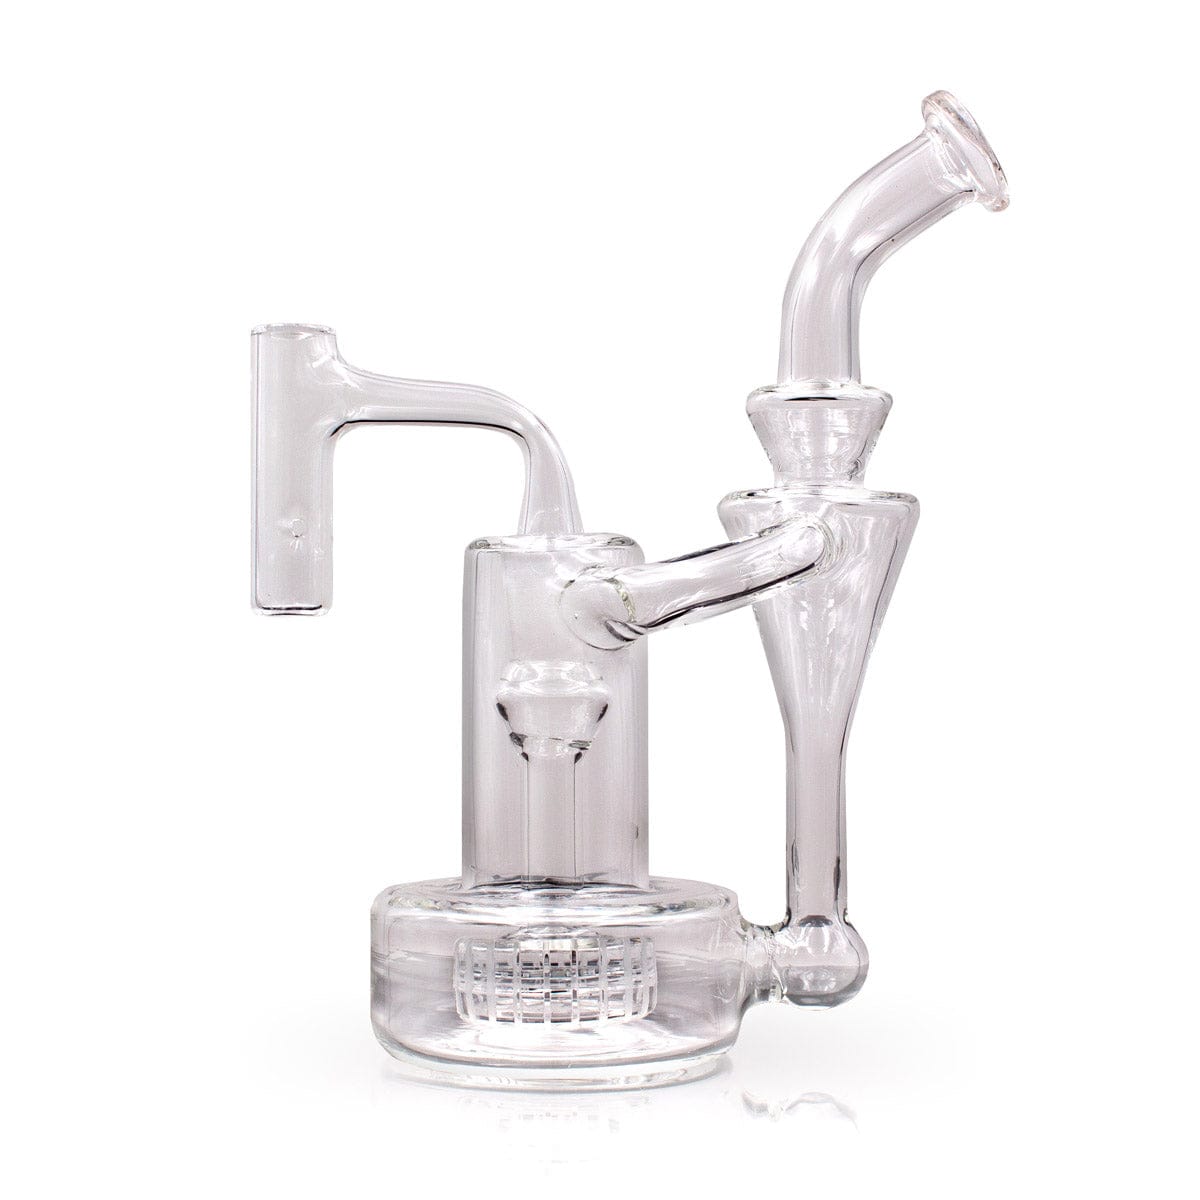 The Stash Shack Dab Rig 7.25 Matrix Recycler Water Pipe